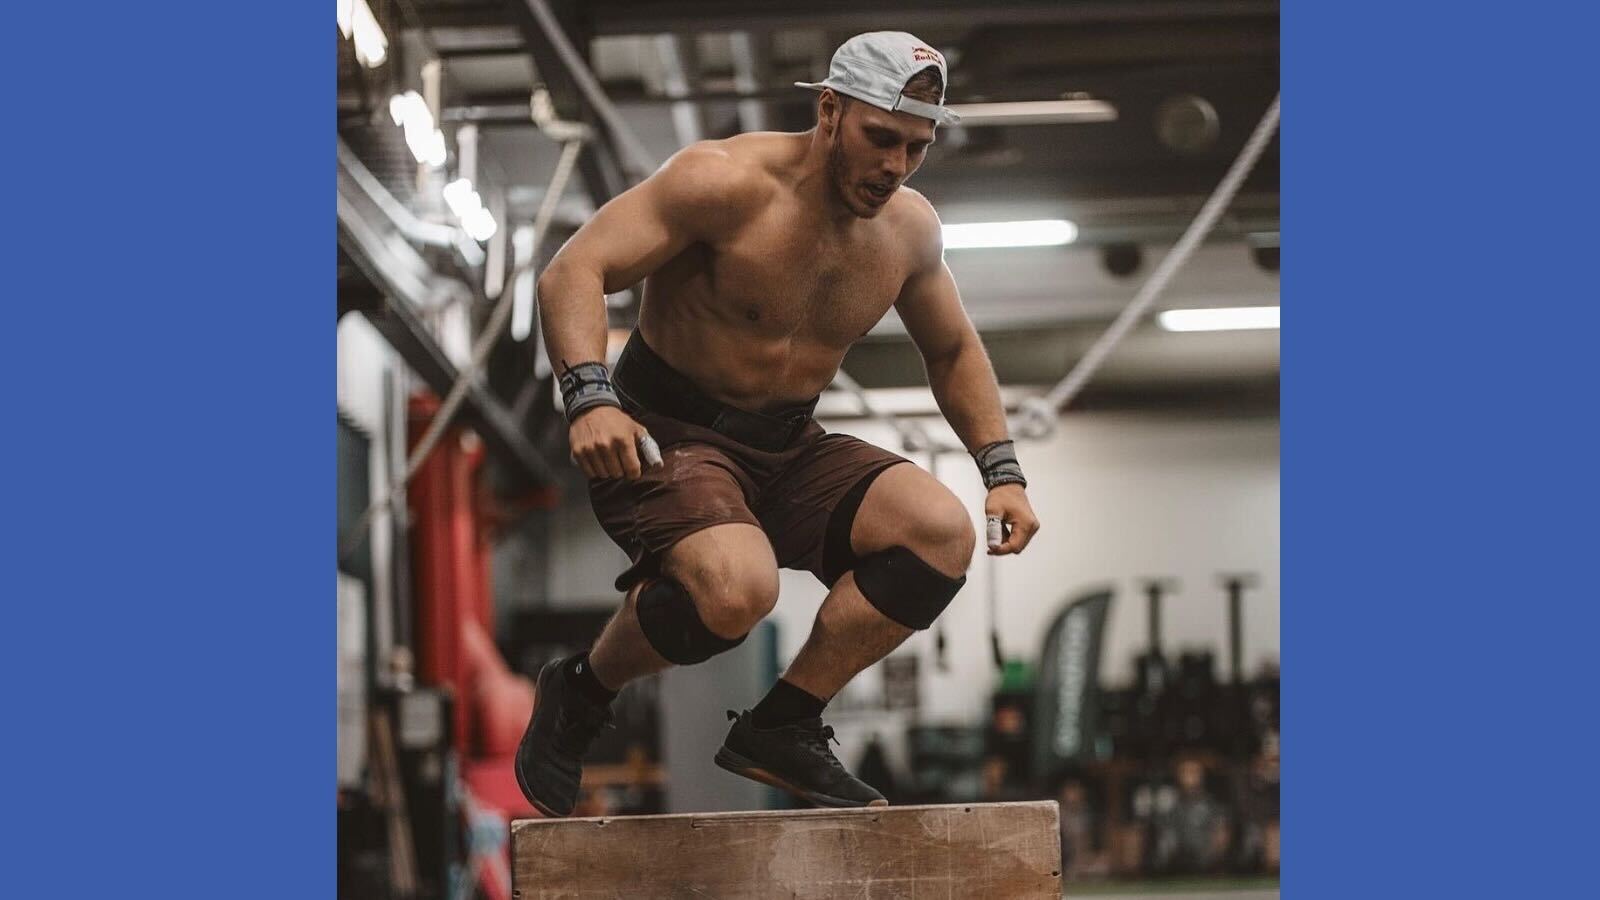 8 Quick Takeaways From the (Unofficial) CrossFit Quarterfinals